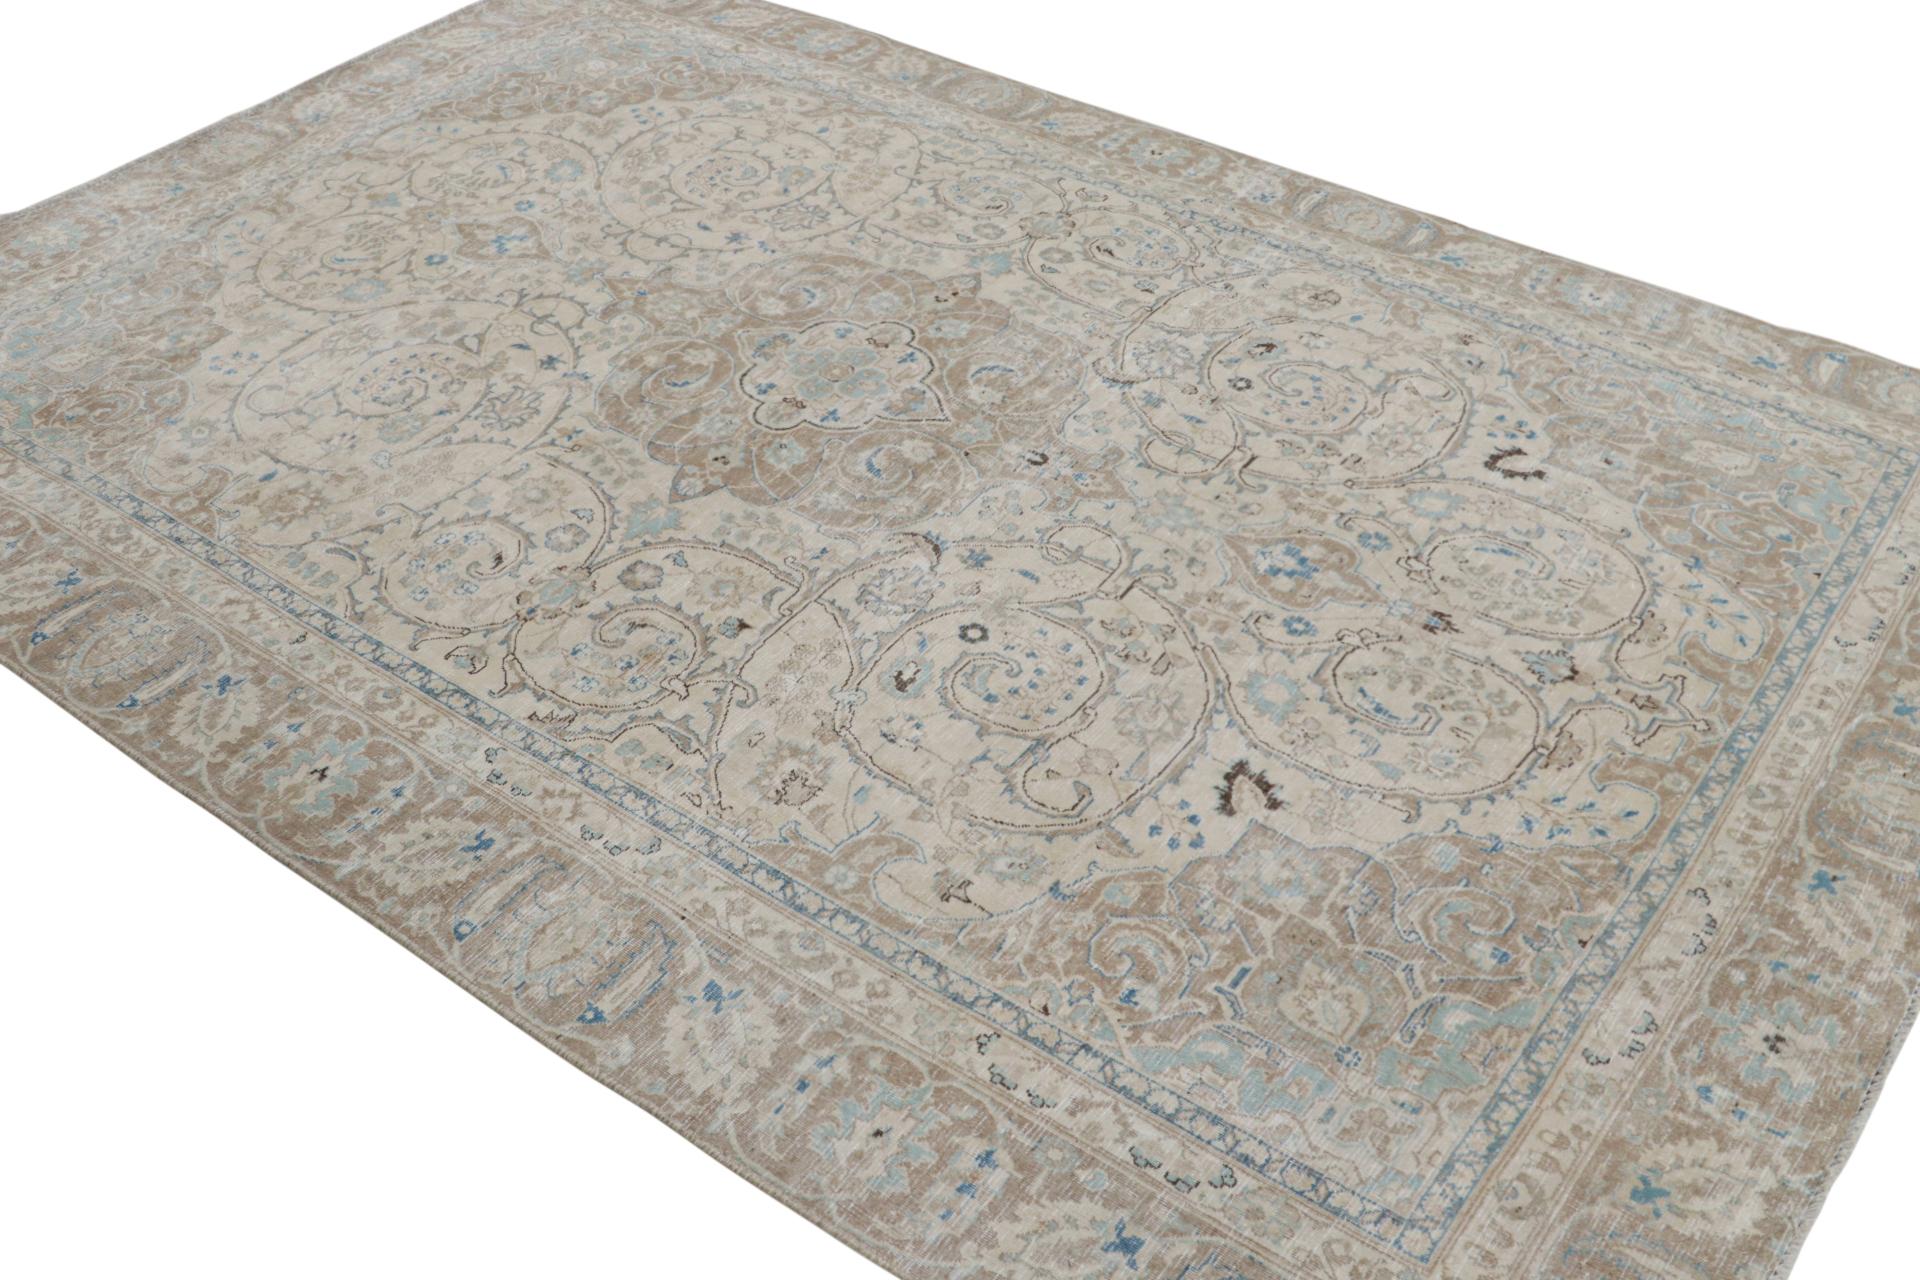 Hand knotted in wool on cotton, a 7x10 Persian Tabriz rug circa 1970-1980 - latest to join Rug & Kilim’s vintage selections.

On the Design:

The rug enjoys an antique wash creating its shabby-chic, distressed look while still being a young vintage